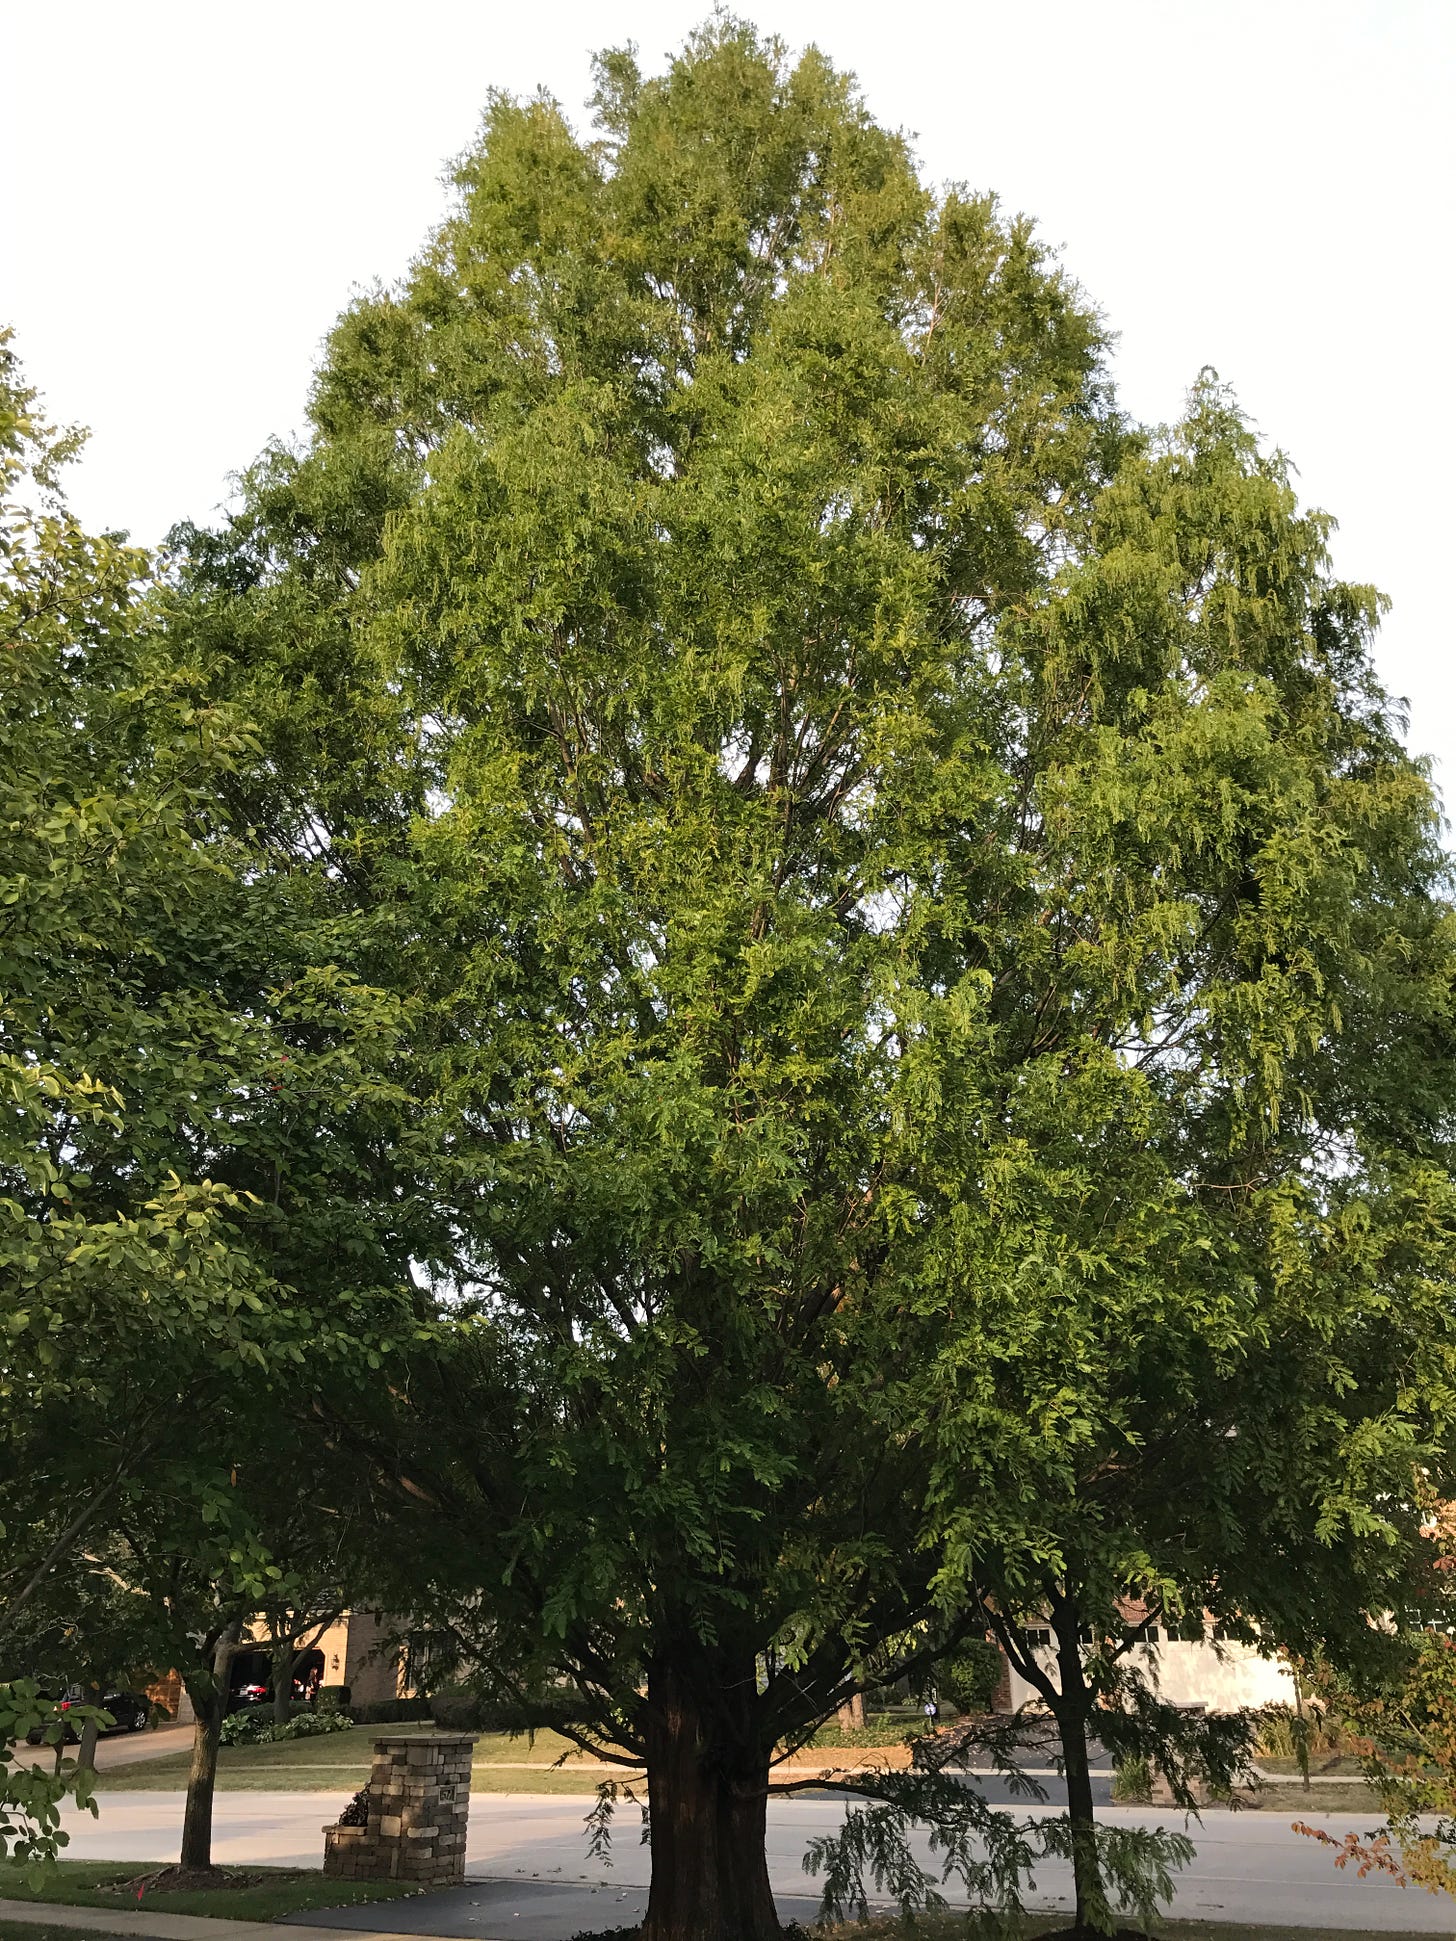 Photo of the same Dawn Redwood, from father away. Showing the whole tree, with broad branches and leaves just beginning to turn in the fall.